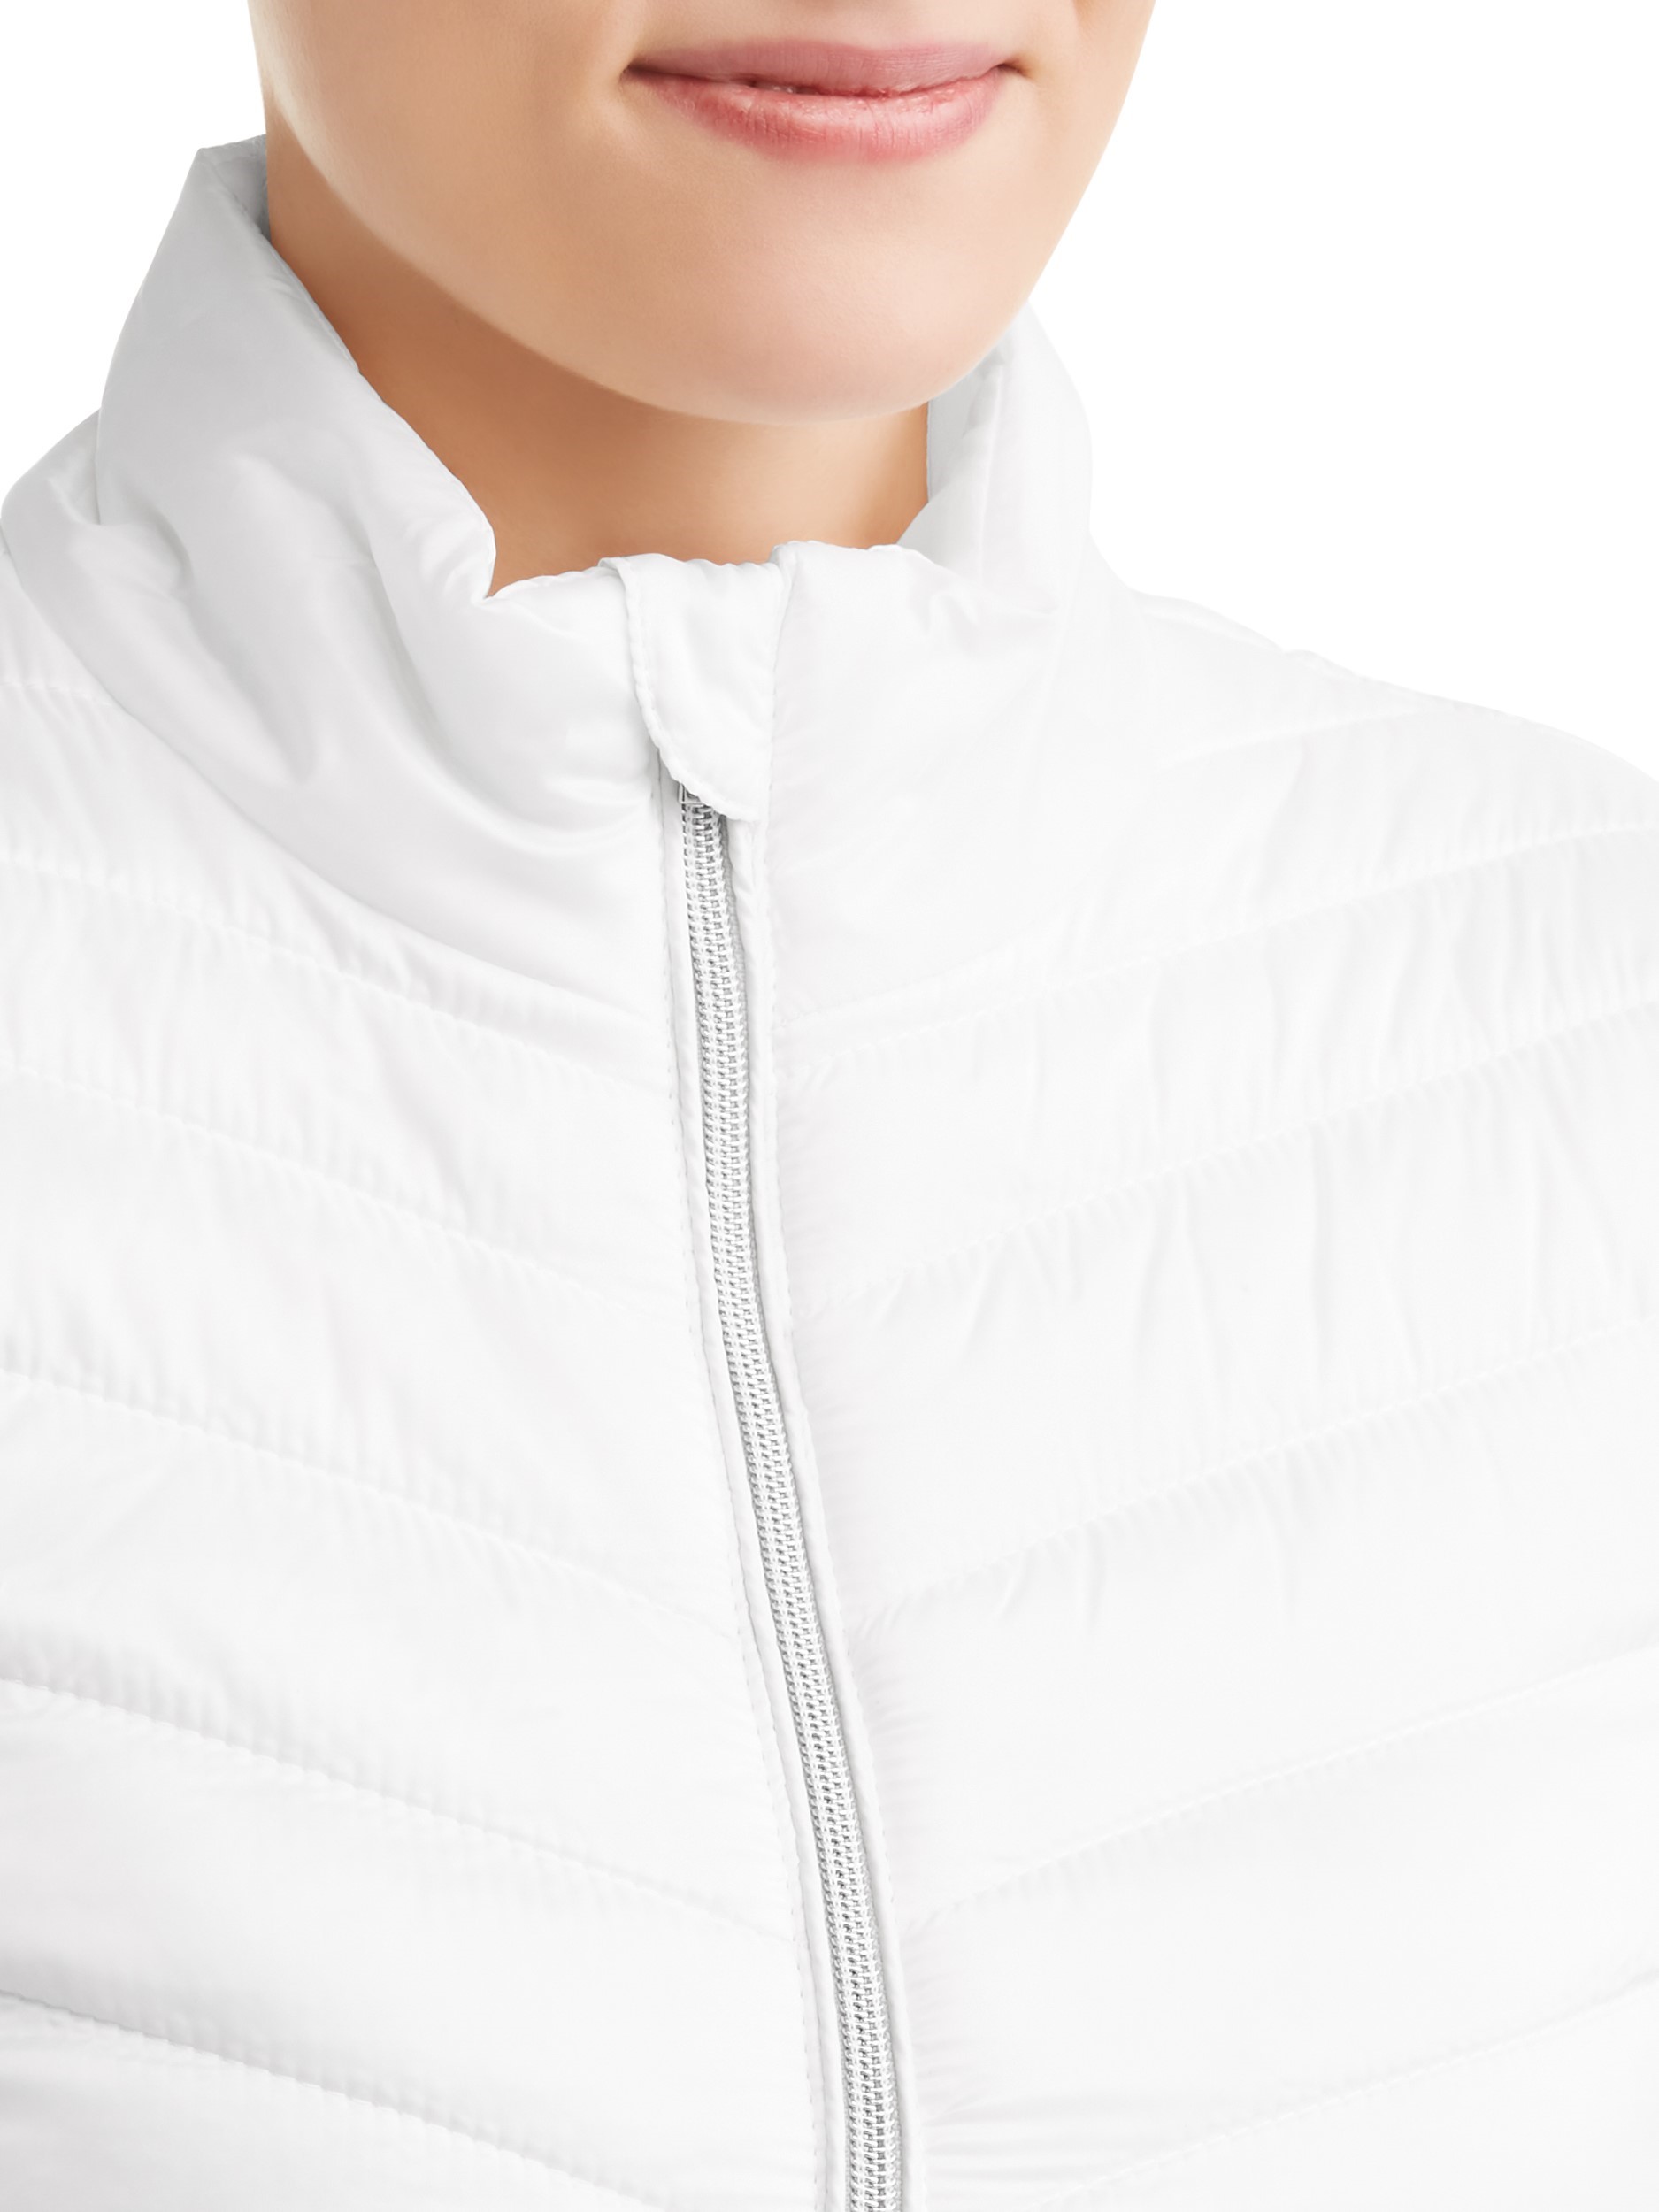 Women's Active Quilted Puffer Jacket - image 4 of 4